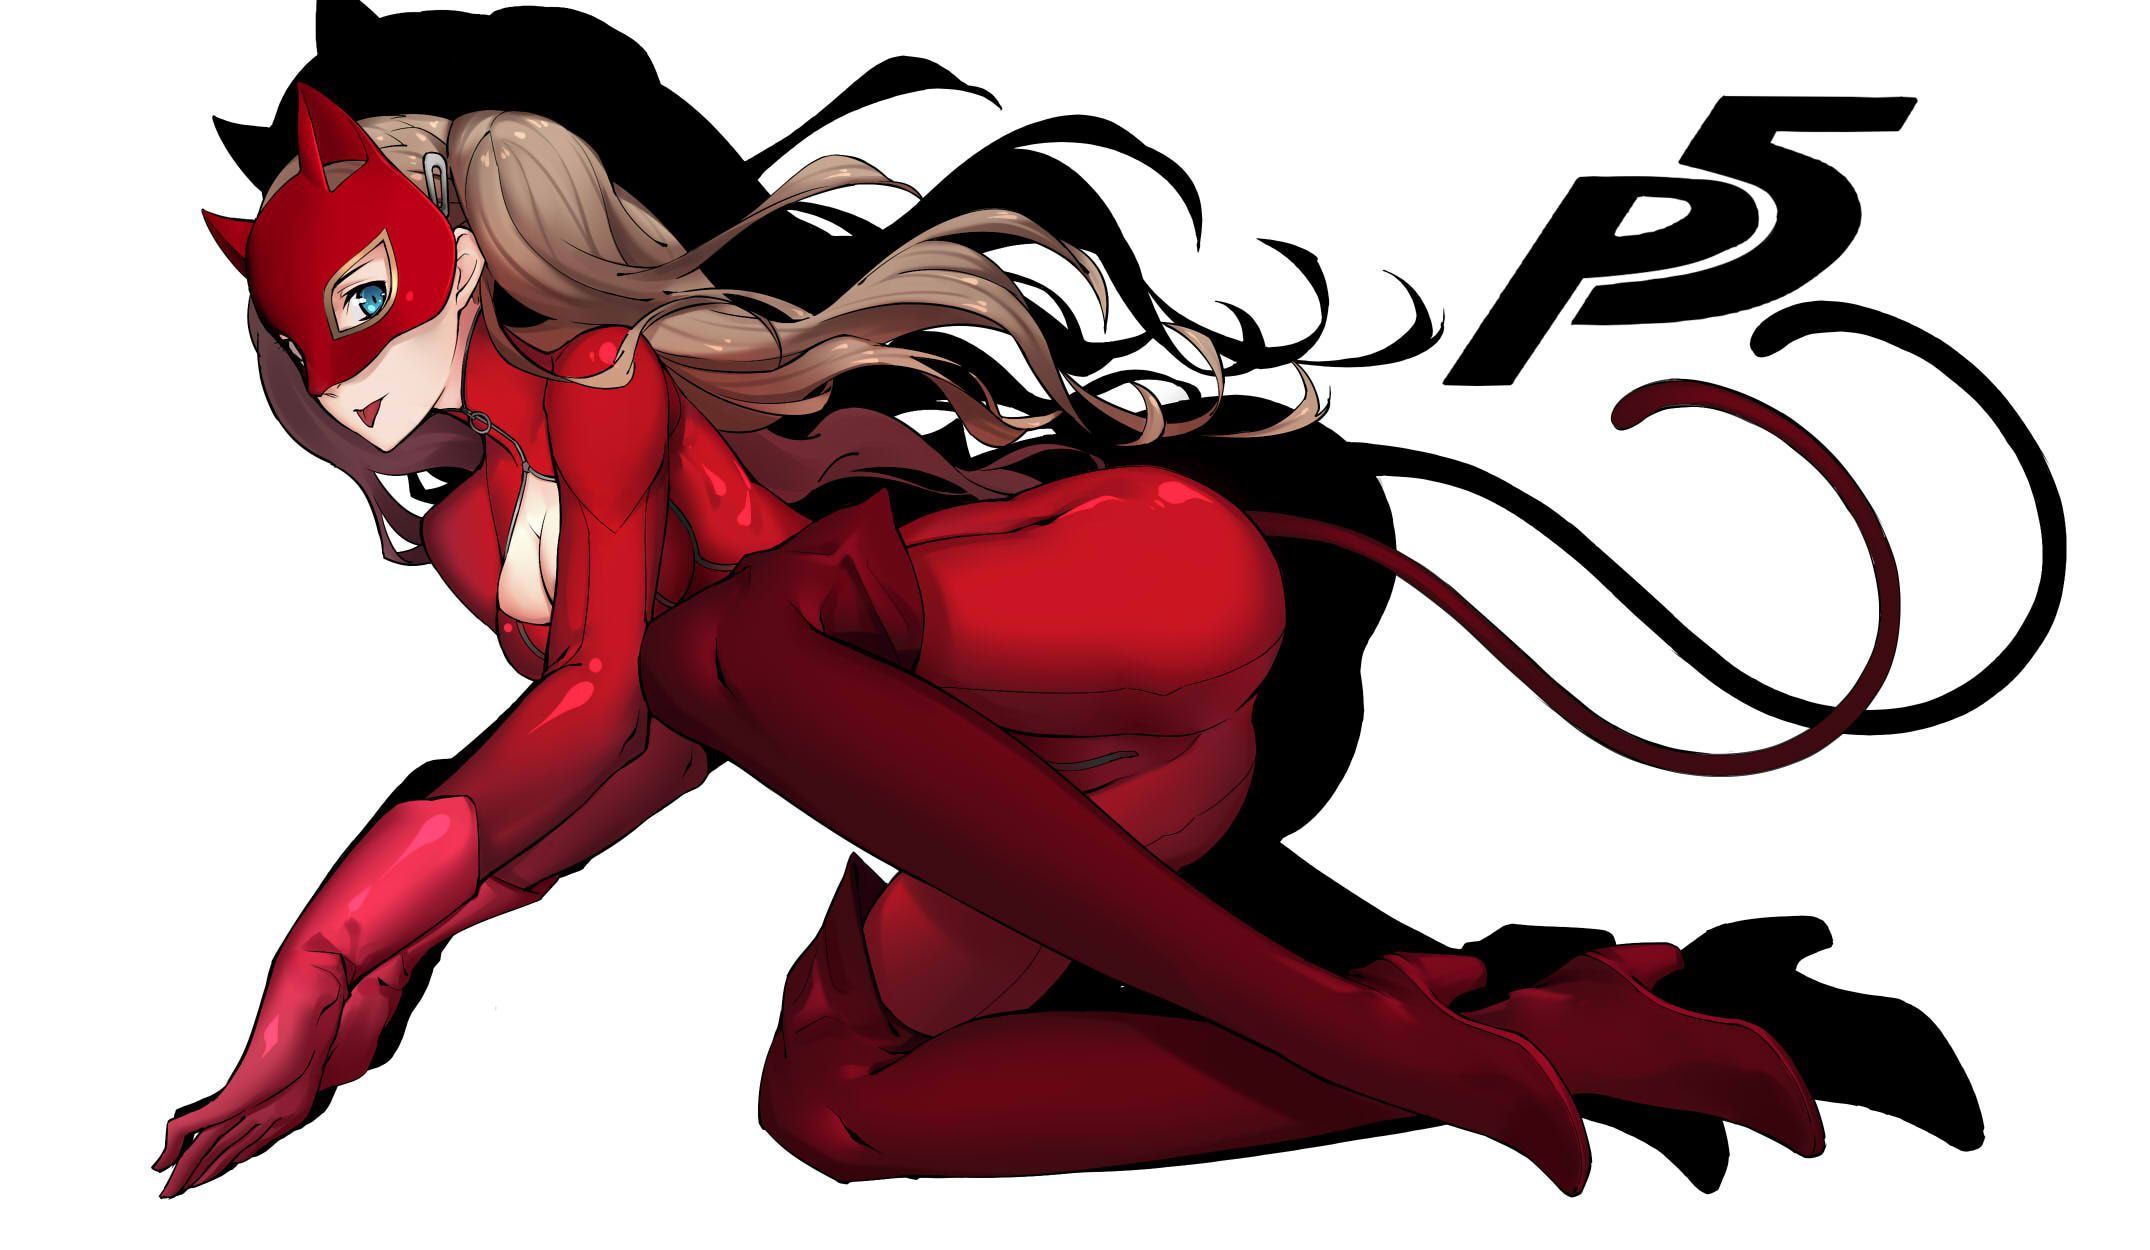 [Persona] erotic image that pulls through with the etch of An Takamaki 8